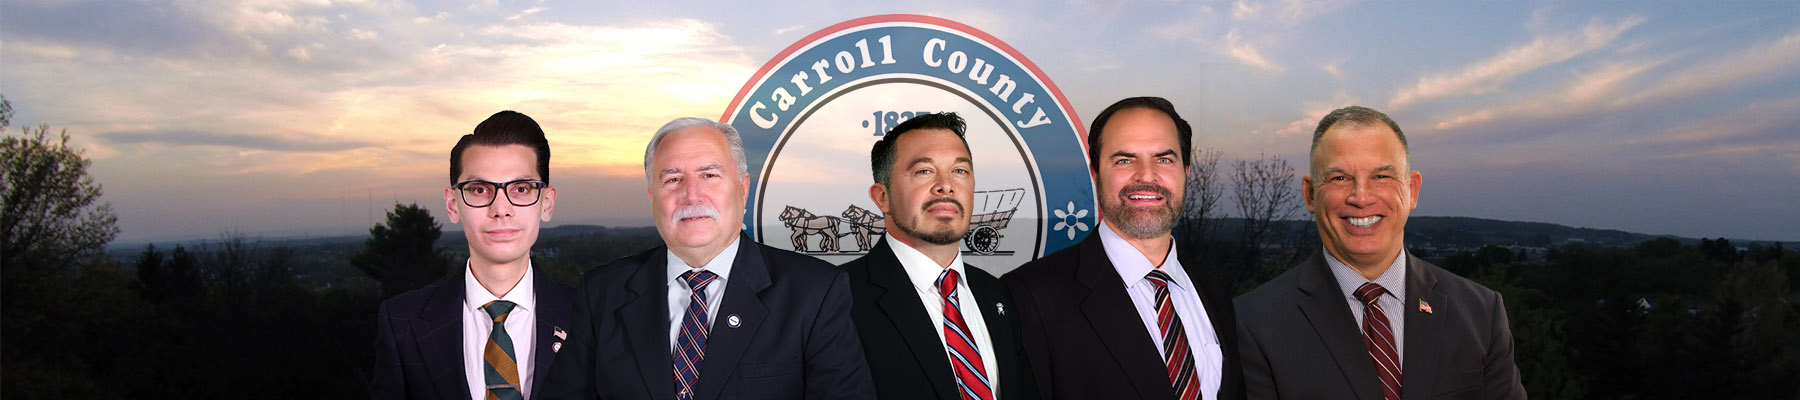 Board of Carroll County Commissioners Weekly Agenda